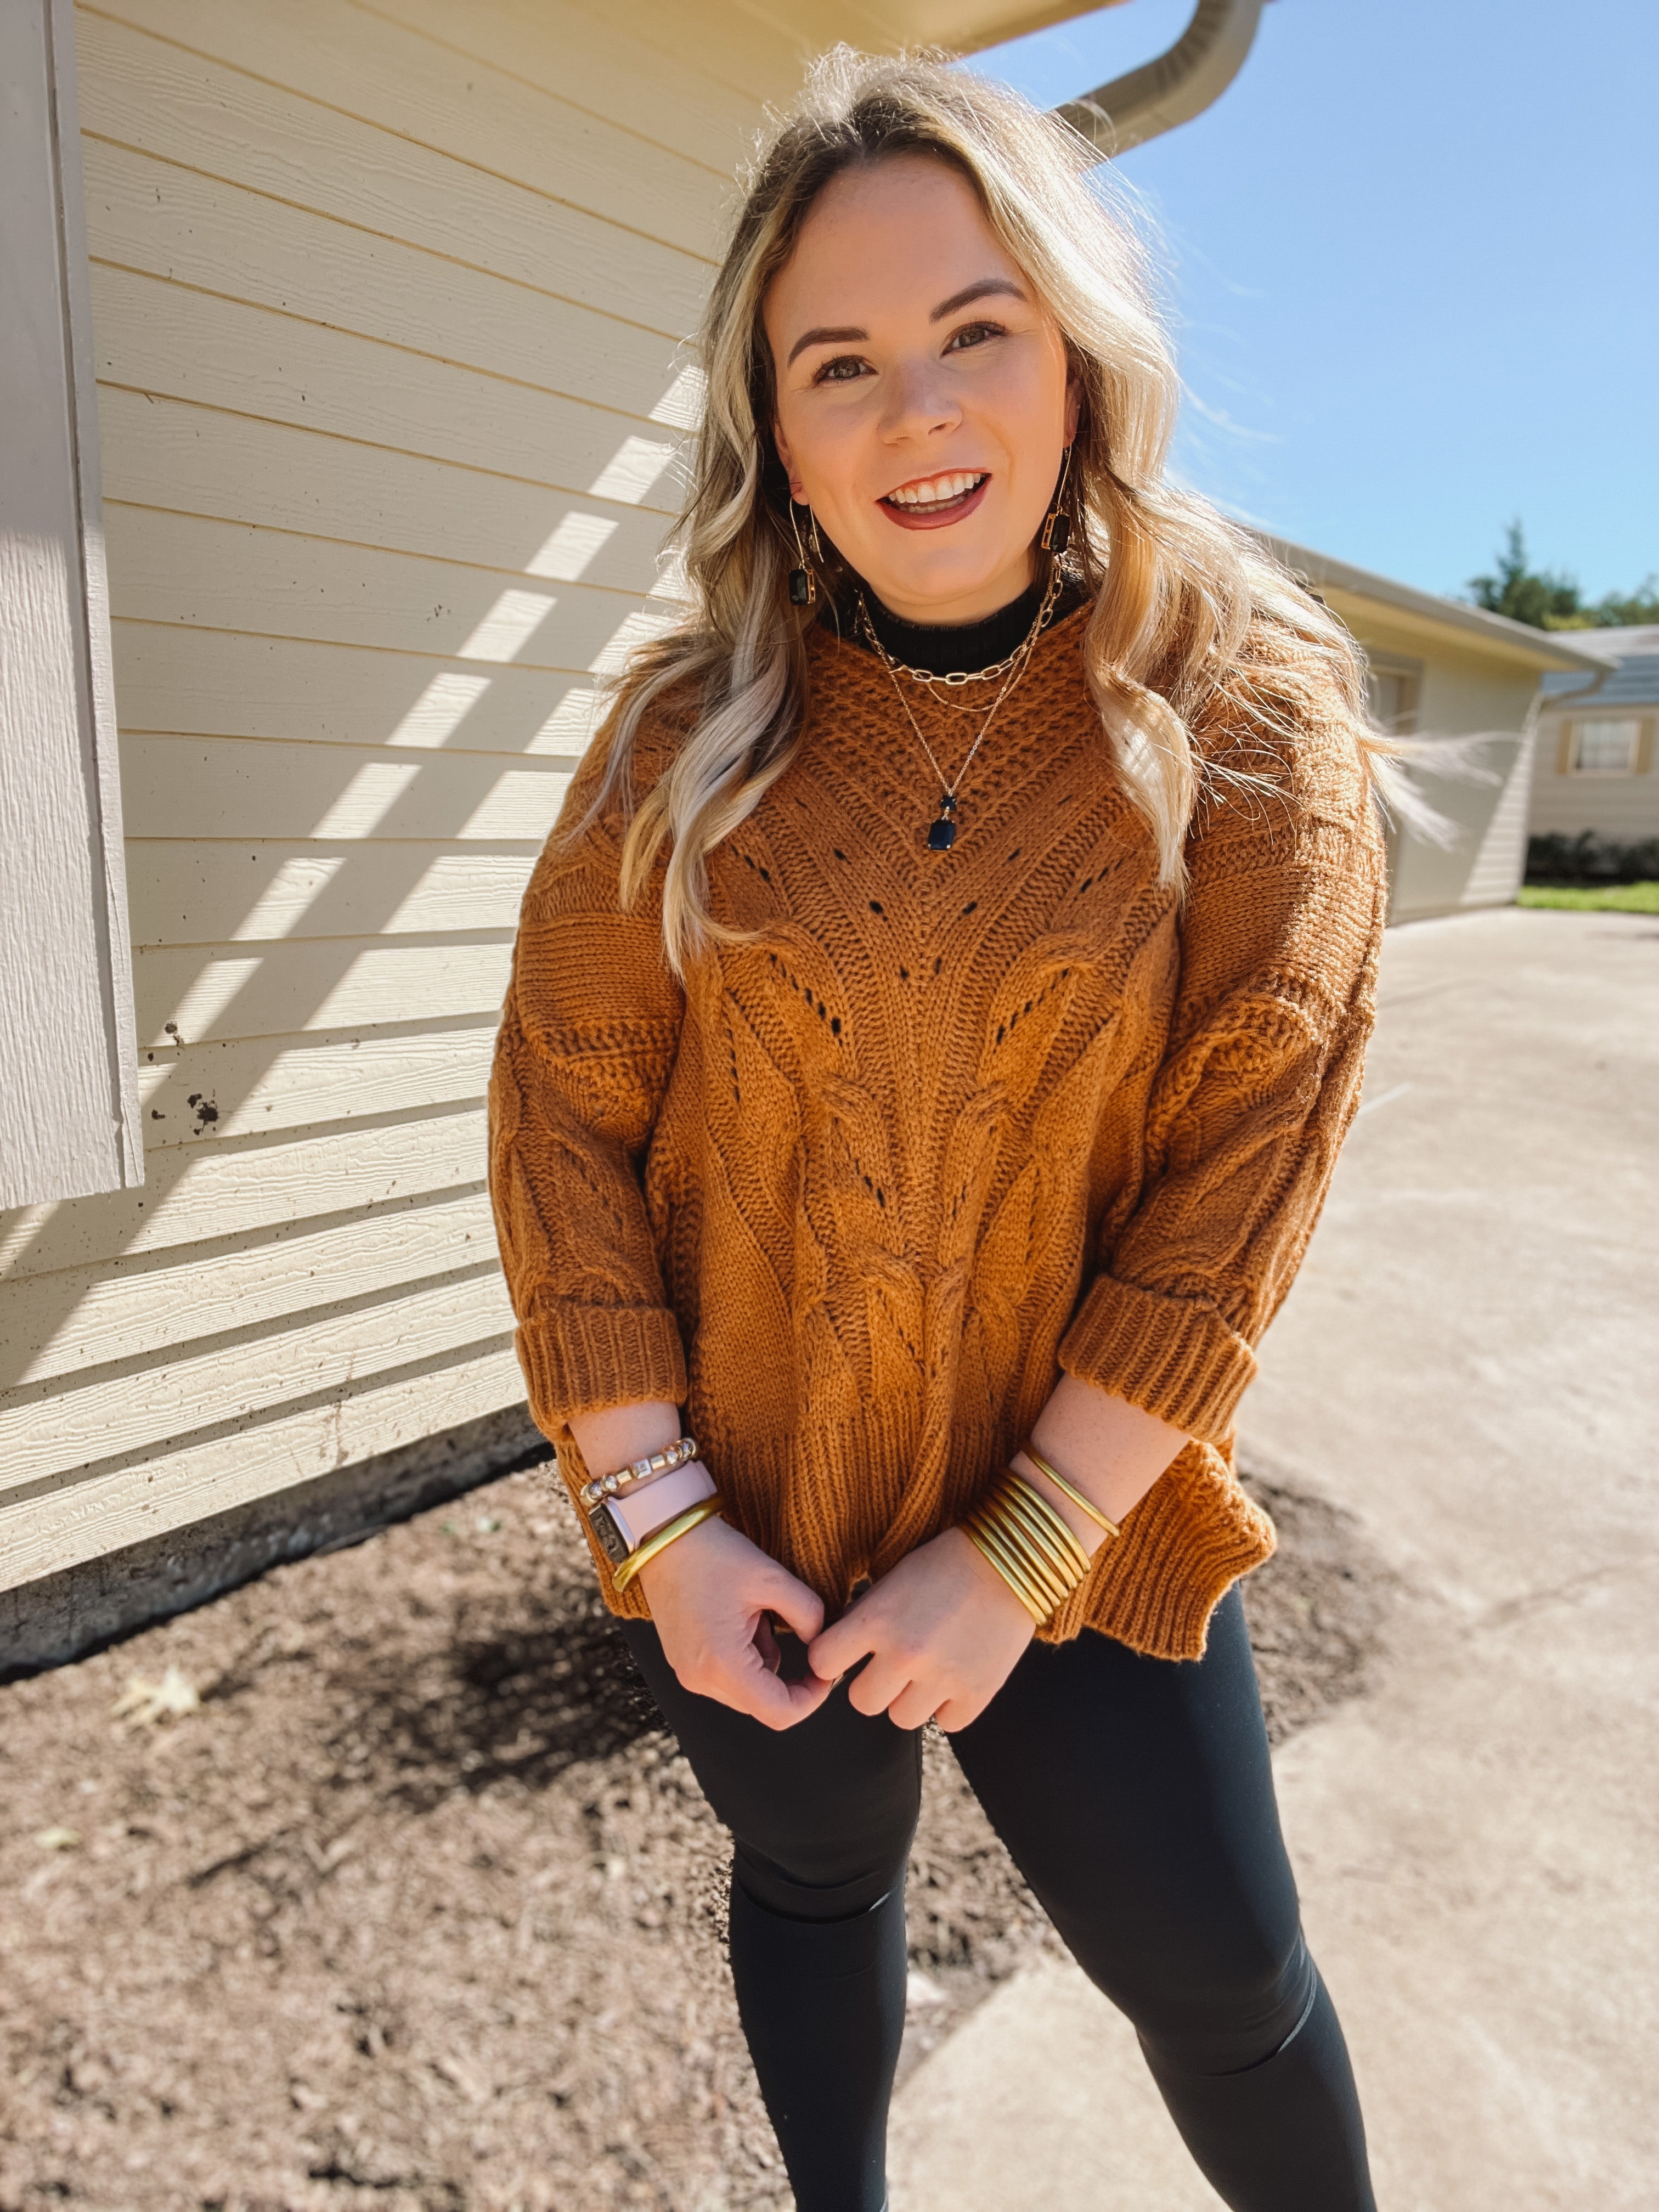 Crisp Morning Air Oversized Dolman 3/4 Sleeve Sweater in Camel Brown - Giddy Up Glamour Boutique